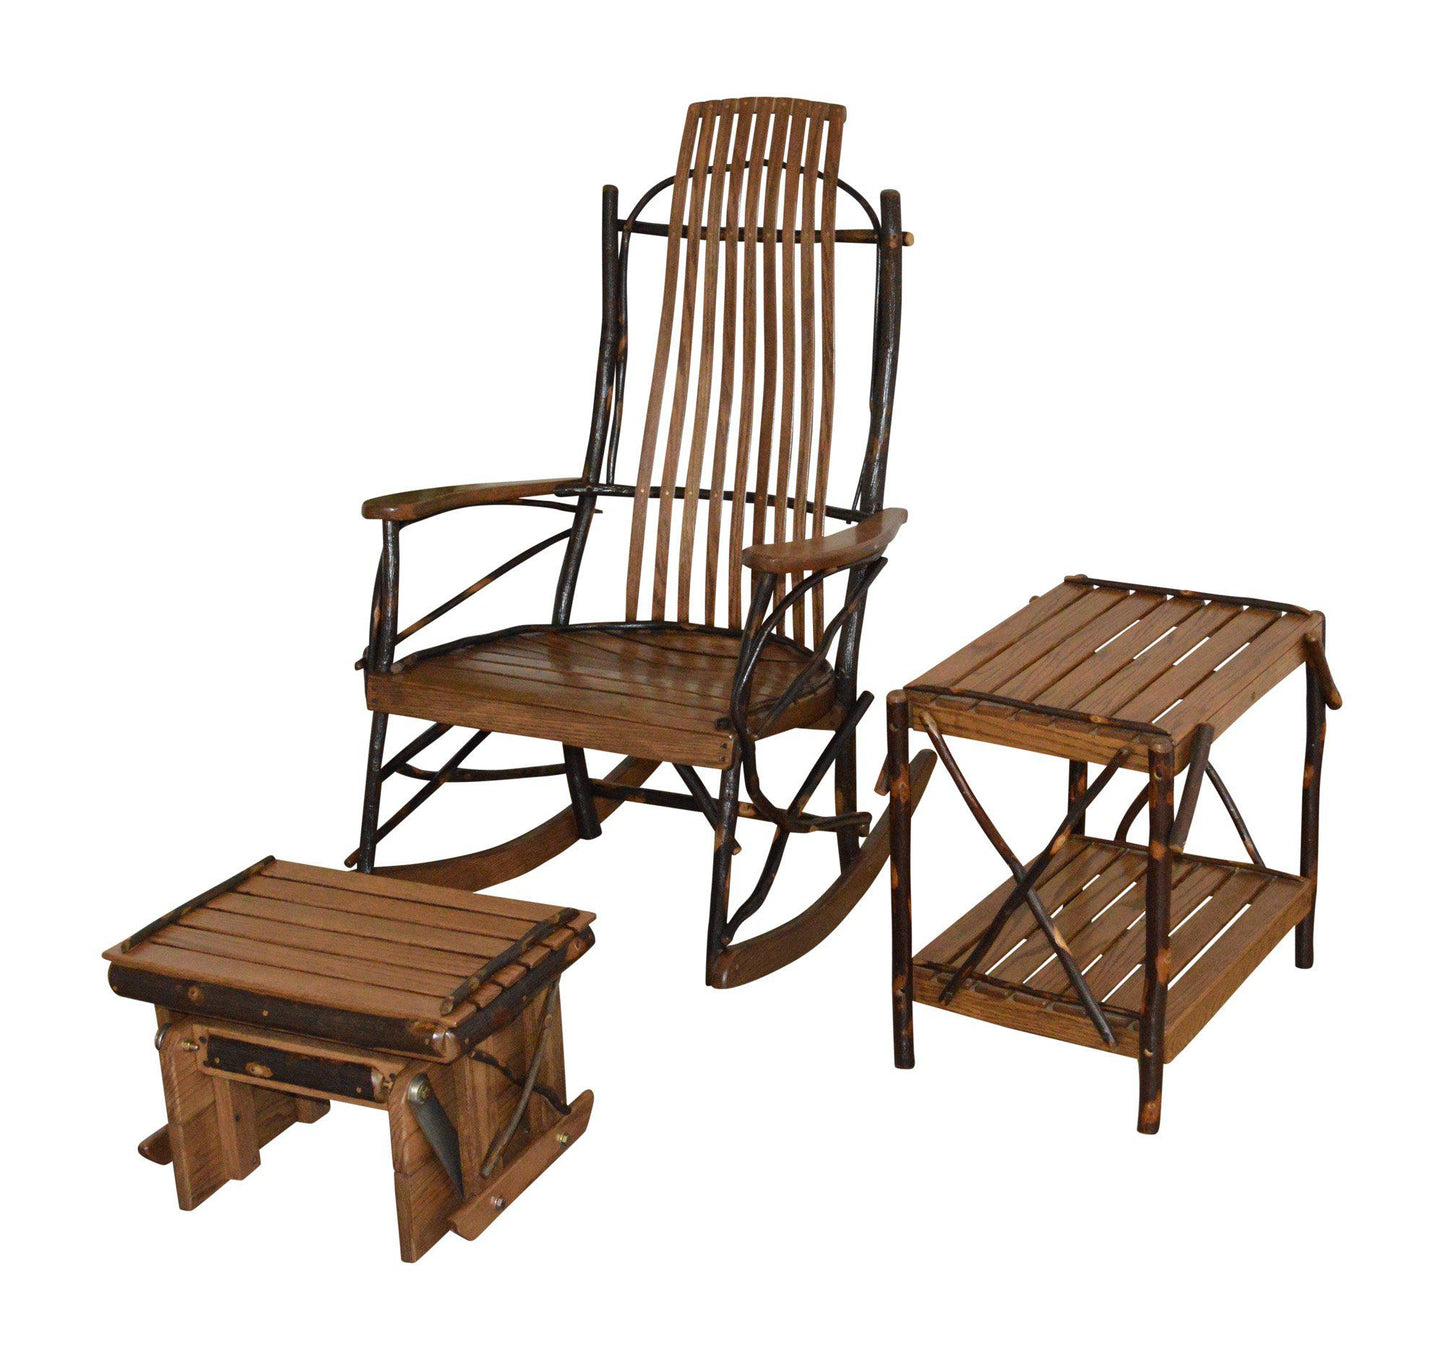 A&L Furniture Co. Amish Bentwood Hickory 9-Slat Rocking Chair w Gliding Ottoman and End Table - LEAD TIME TO SHIP 4 WEEKS OR LESS